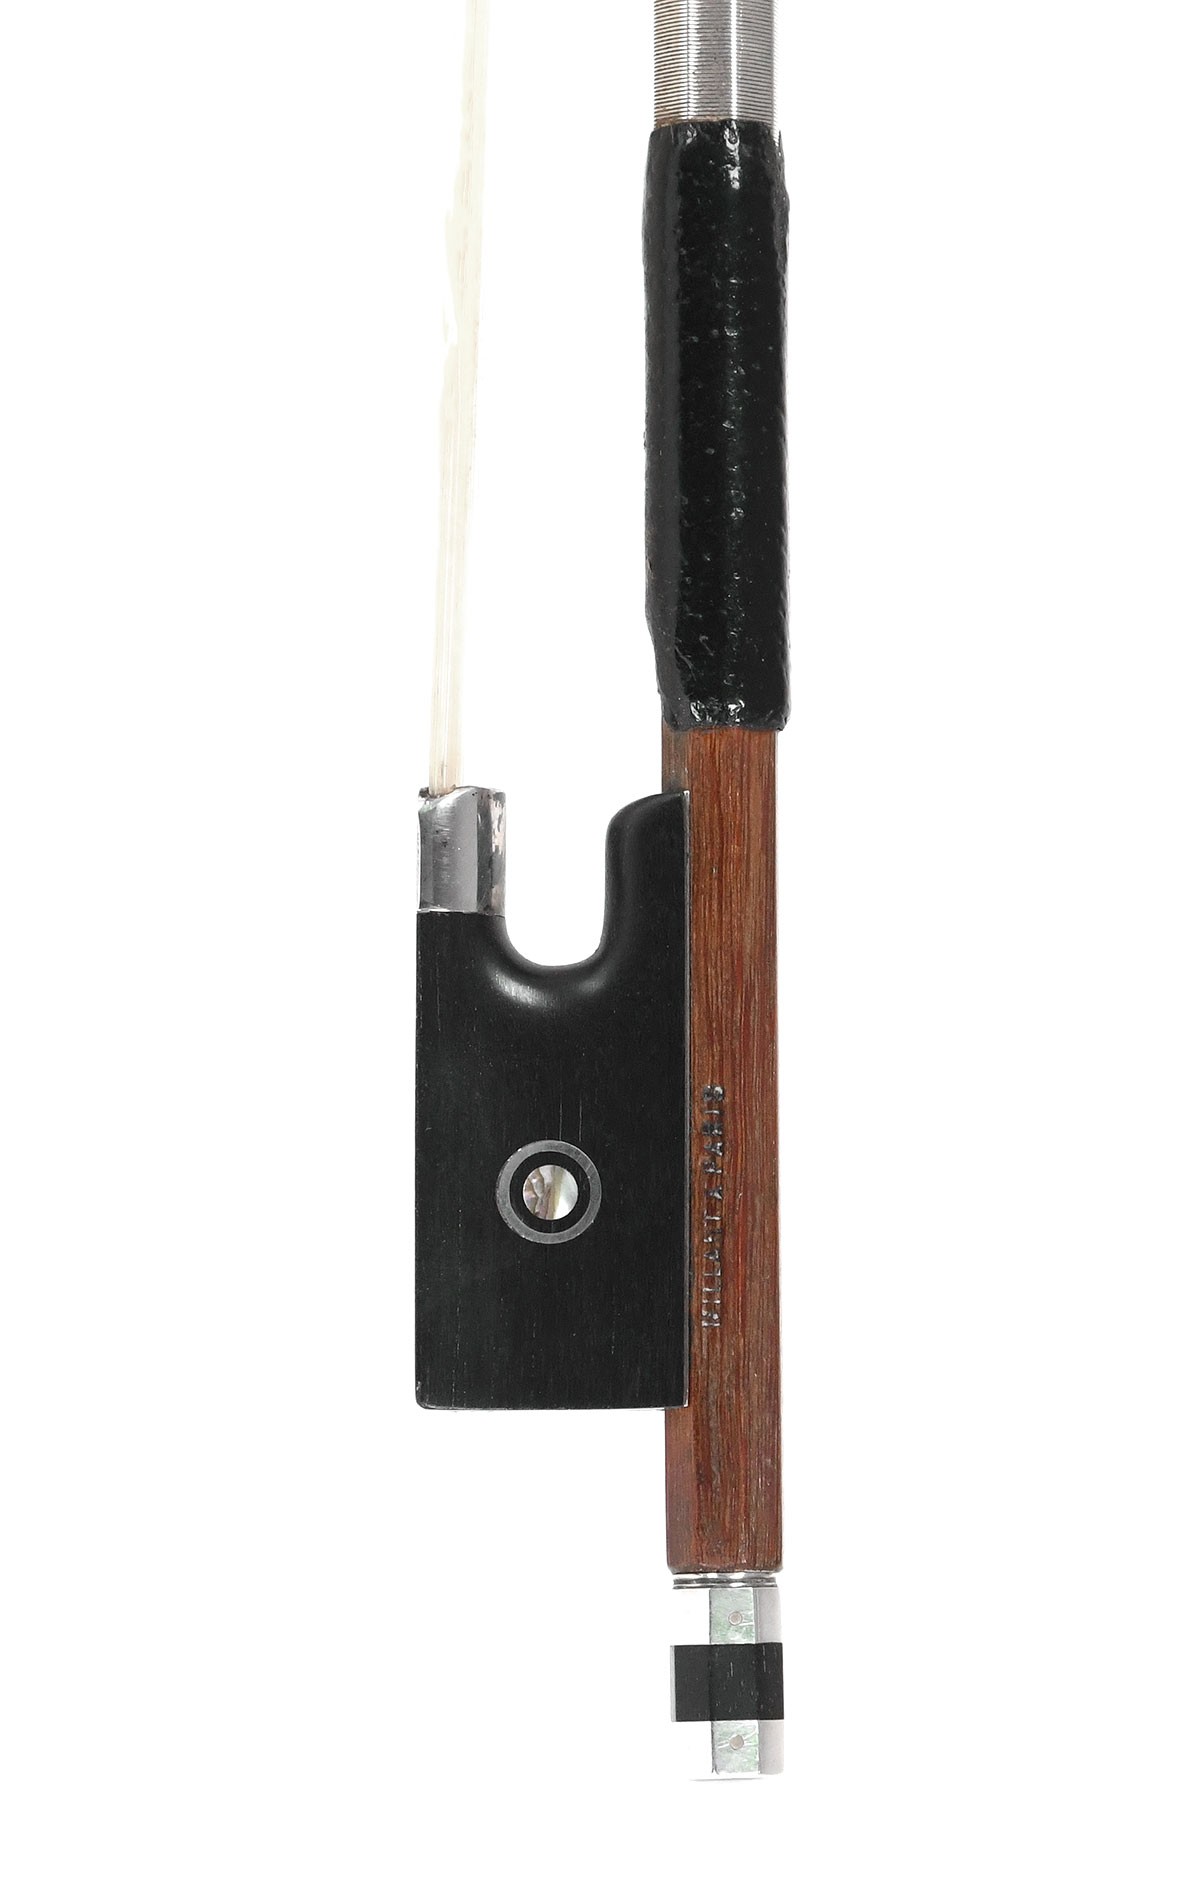 Violin bow for Bernard Millant by Roderich Paesold